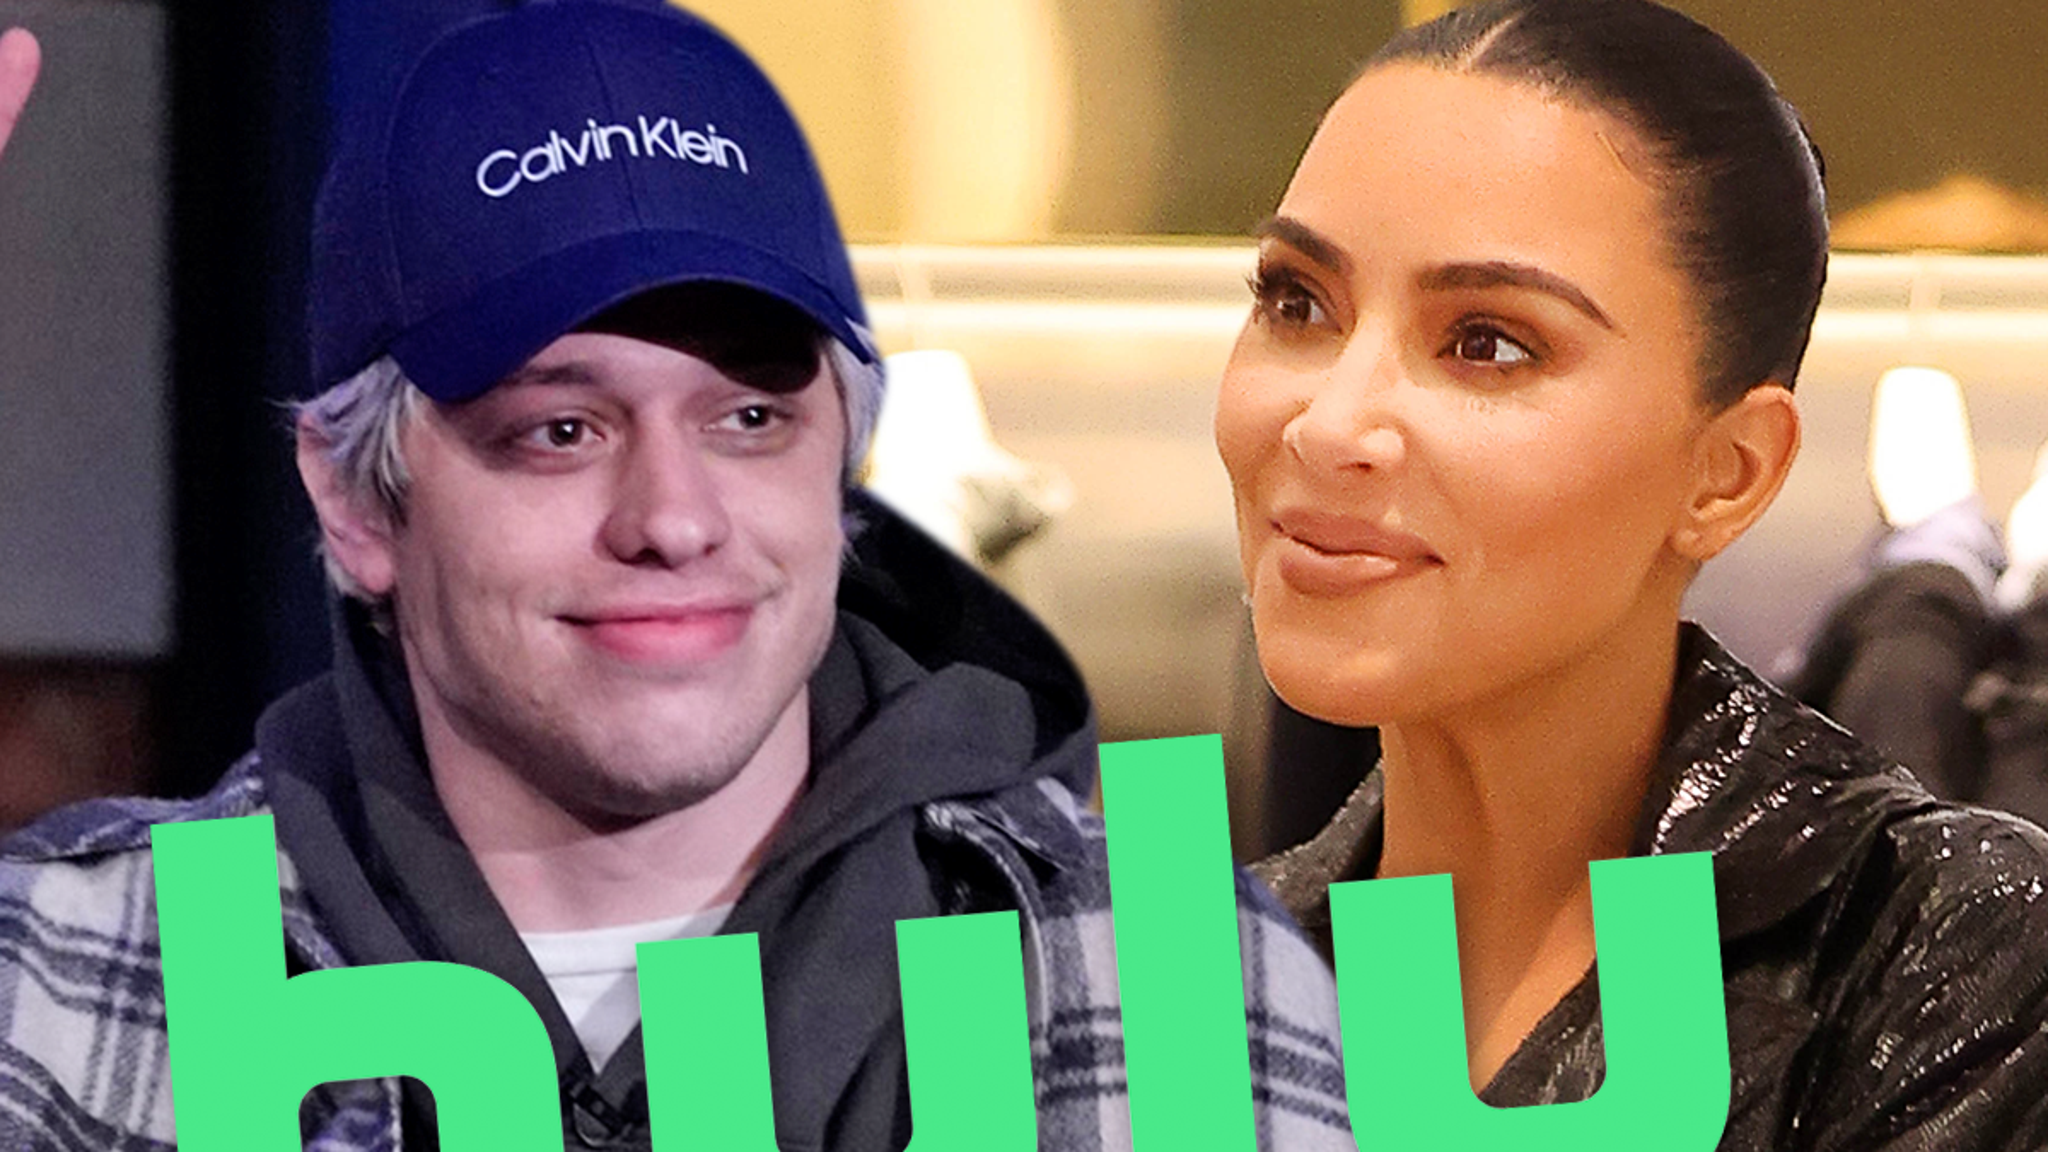 Pete Davidson Will Have to Wait to Appear on Hulu’s ‘The Kardashians’